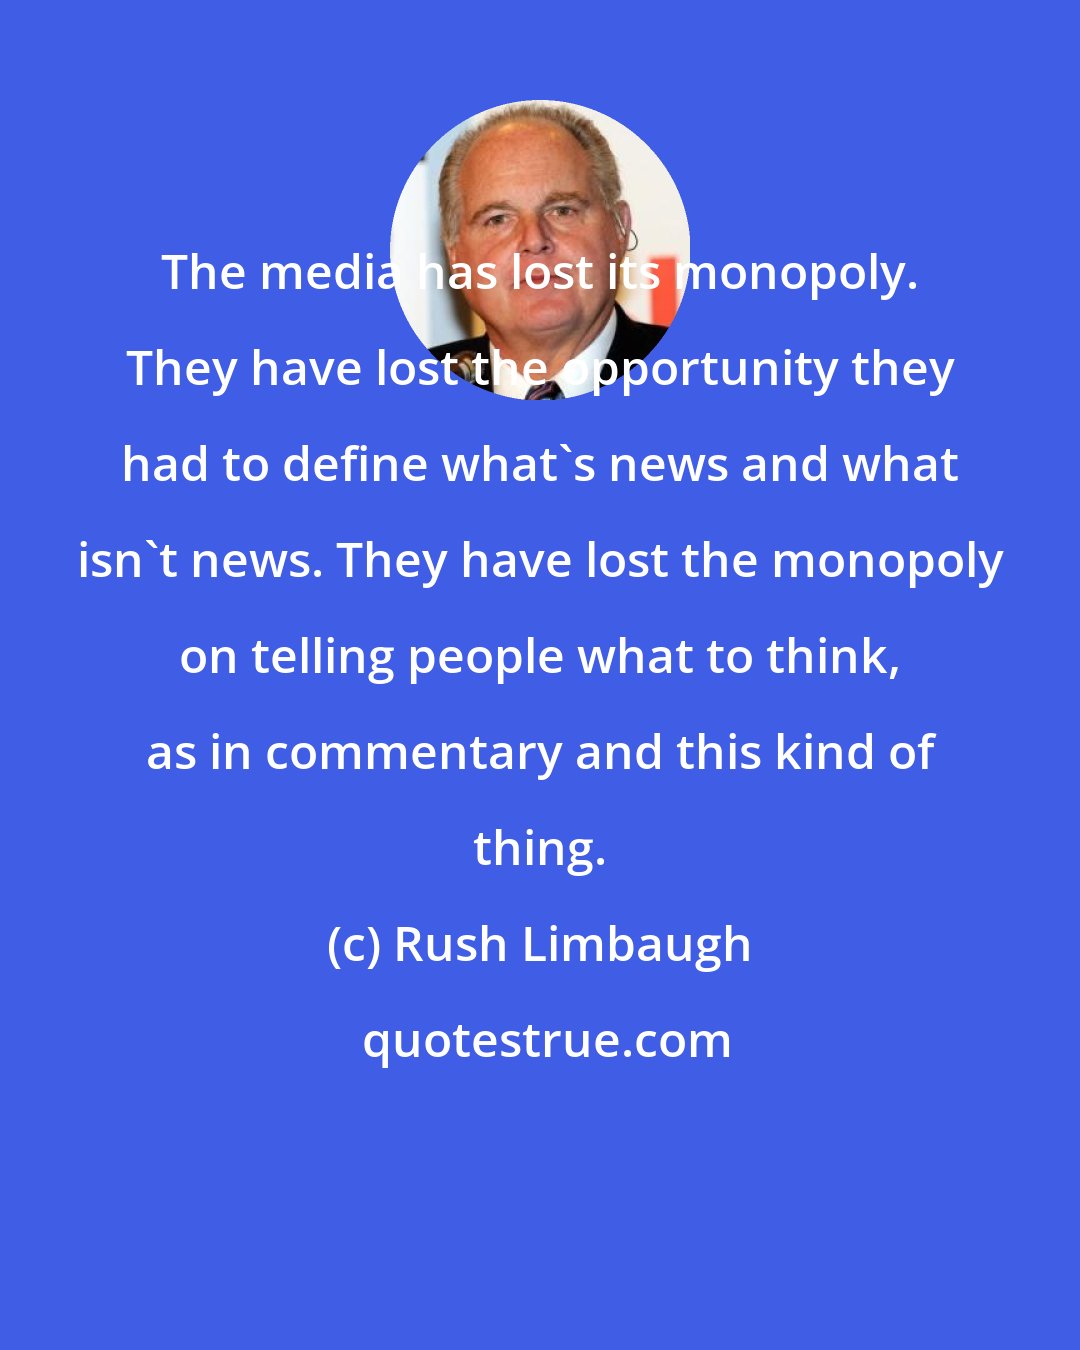 Rush Limbaugh: The media has lost its monopoly. They have lost the opportunity they had to define what's news and what isn't news. They have lost the monopoly on telling people what to think, as in commentary and this kind of thing.